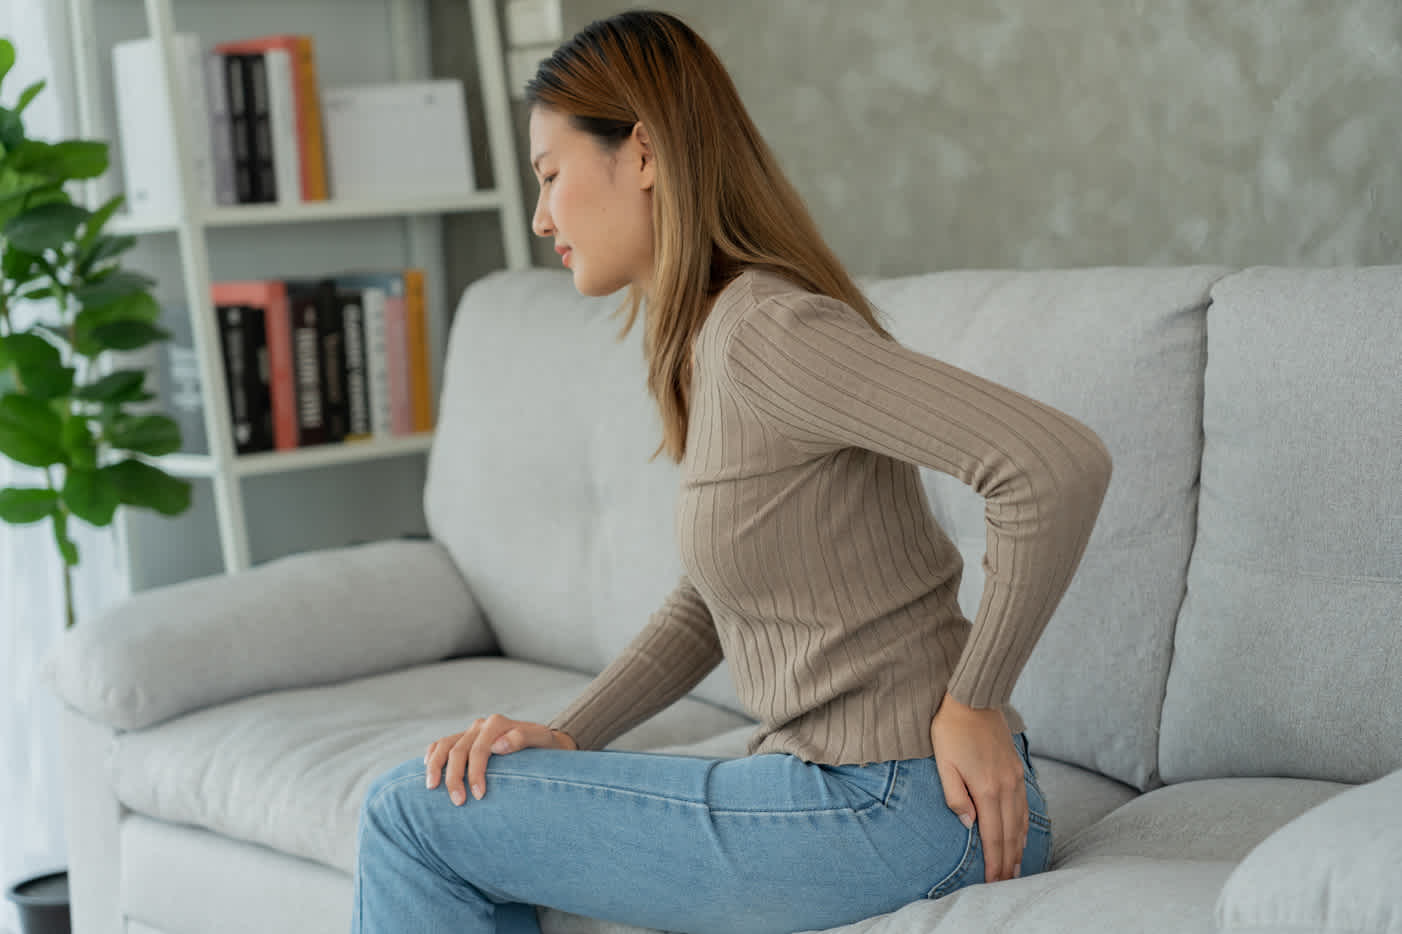 Relieve Tailbone Pain with These Effective Tips